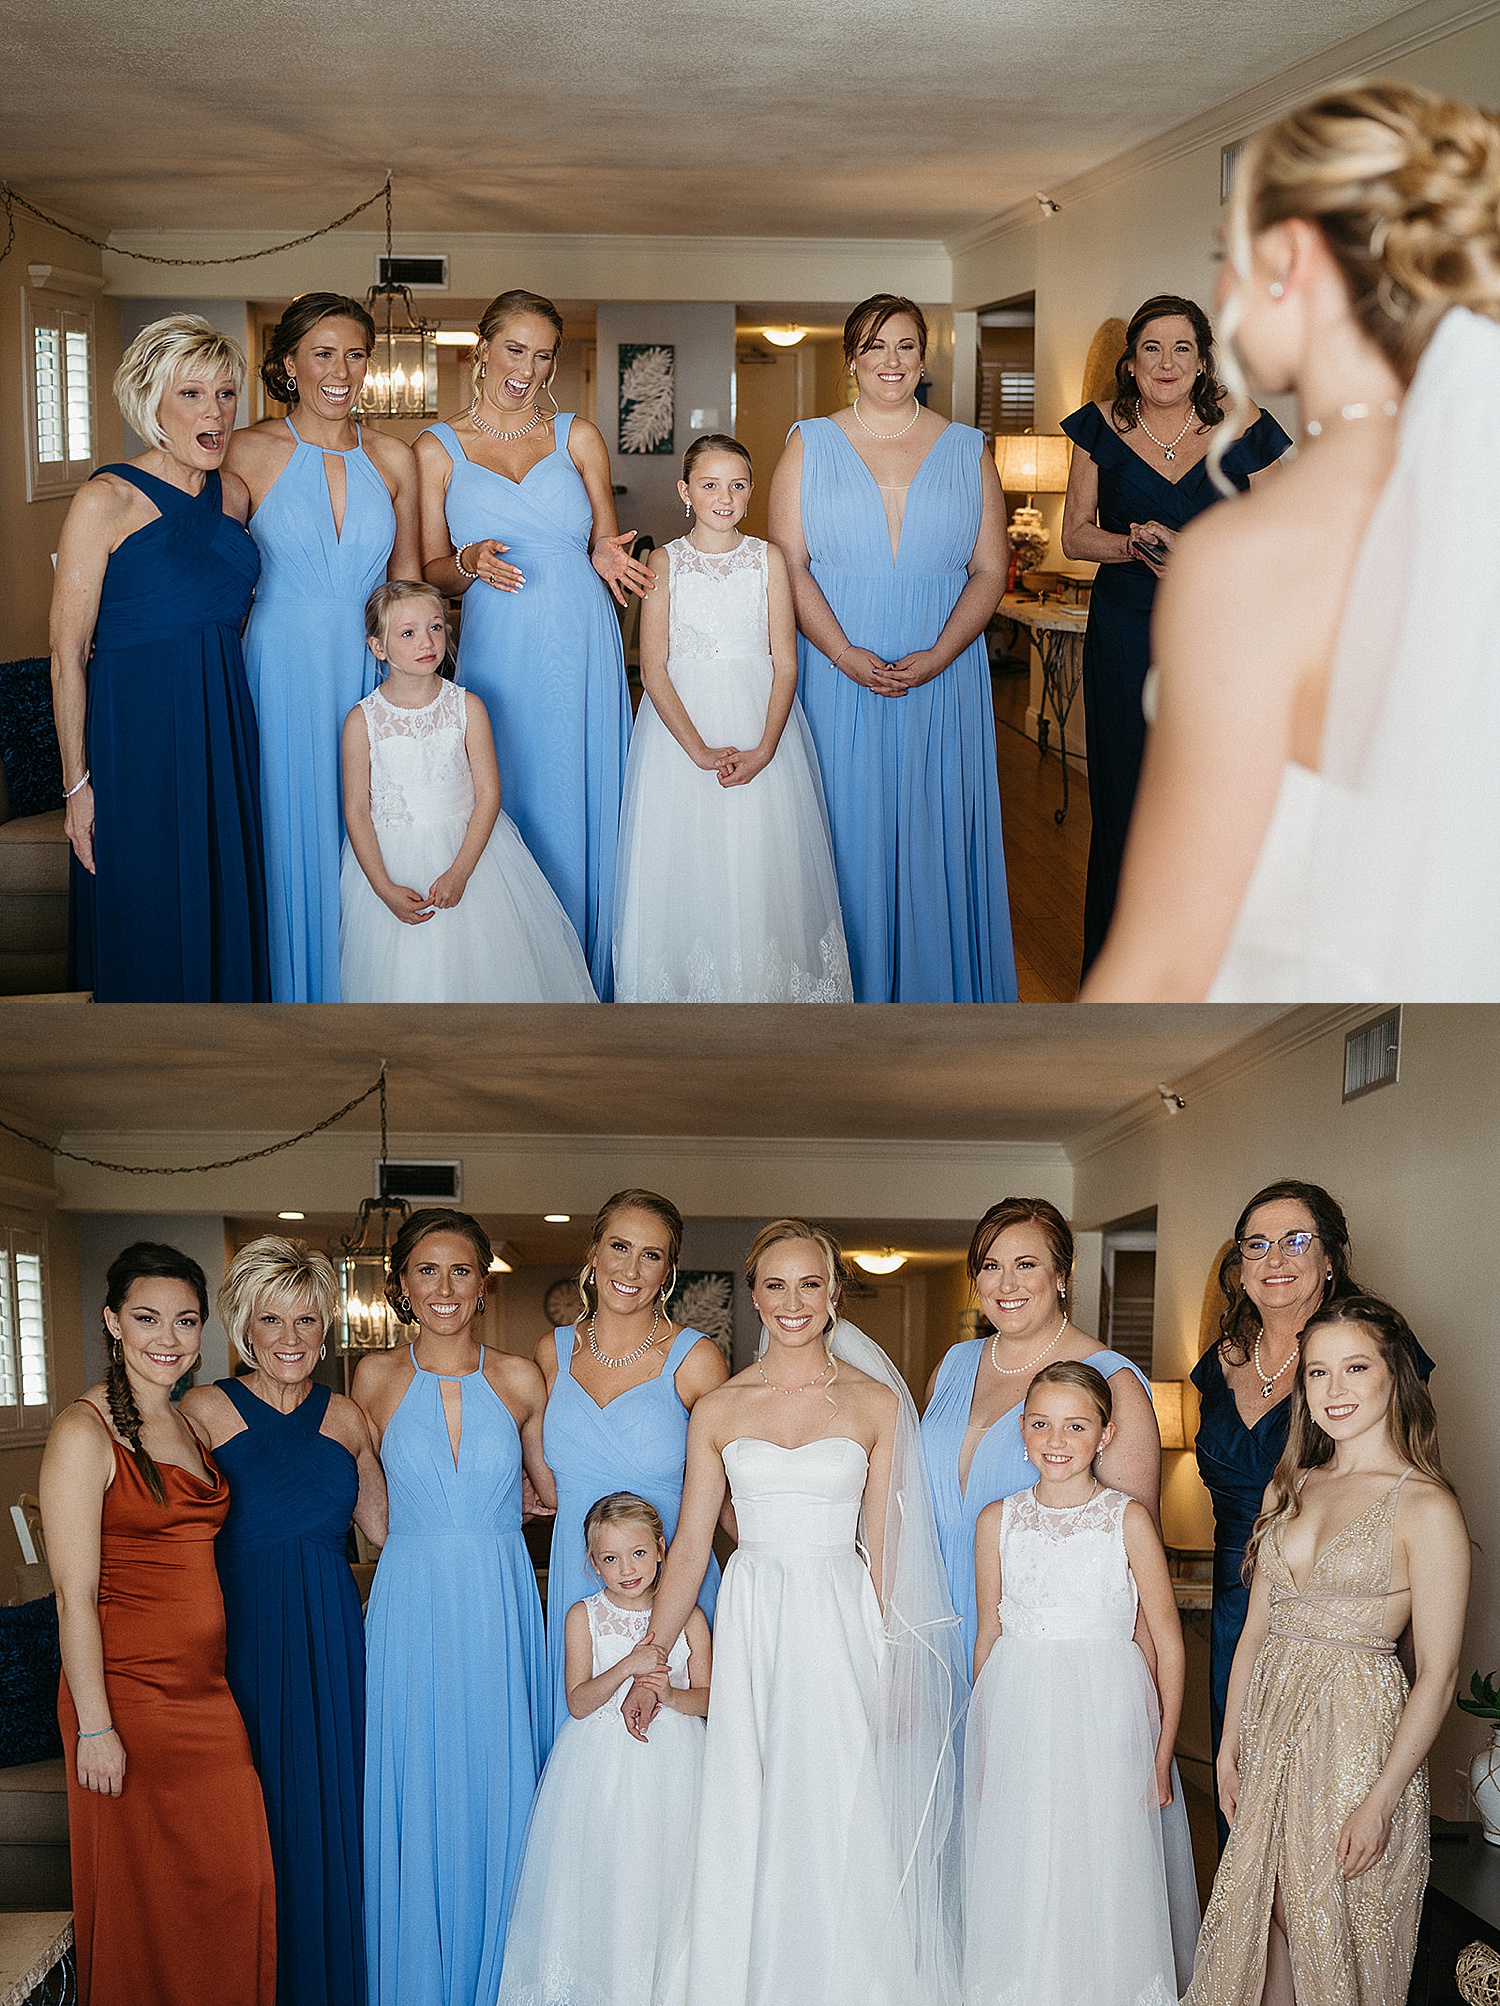 Brides family reacts to final wedding details after getting ready for Destin micro-wedding